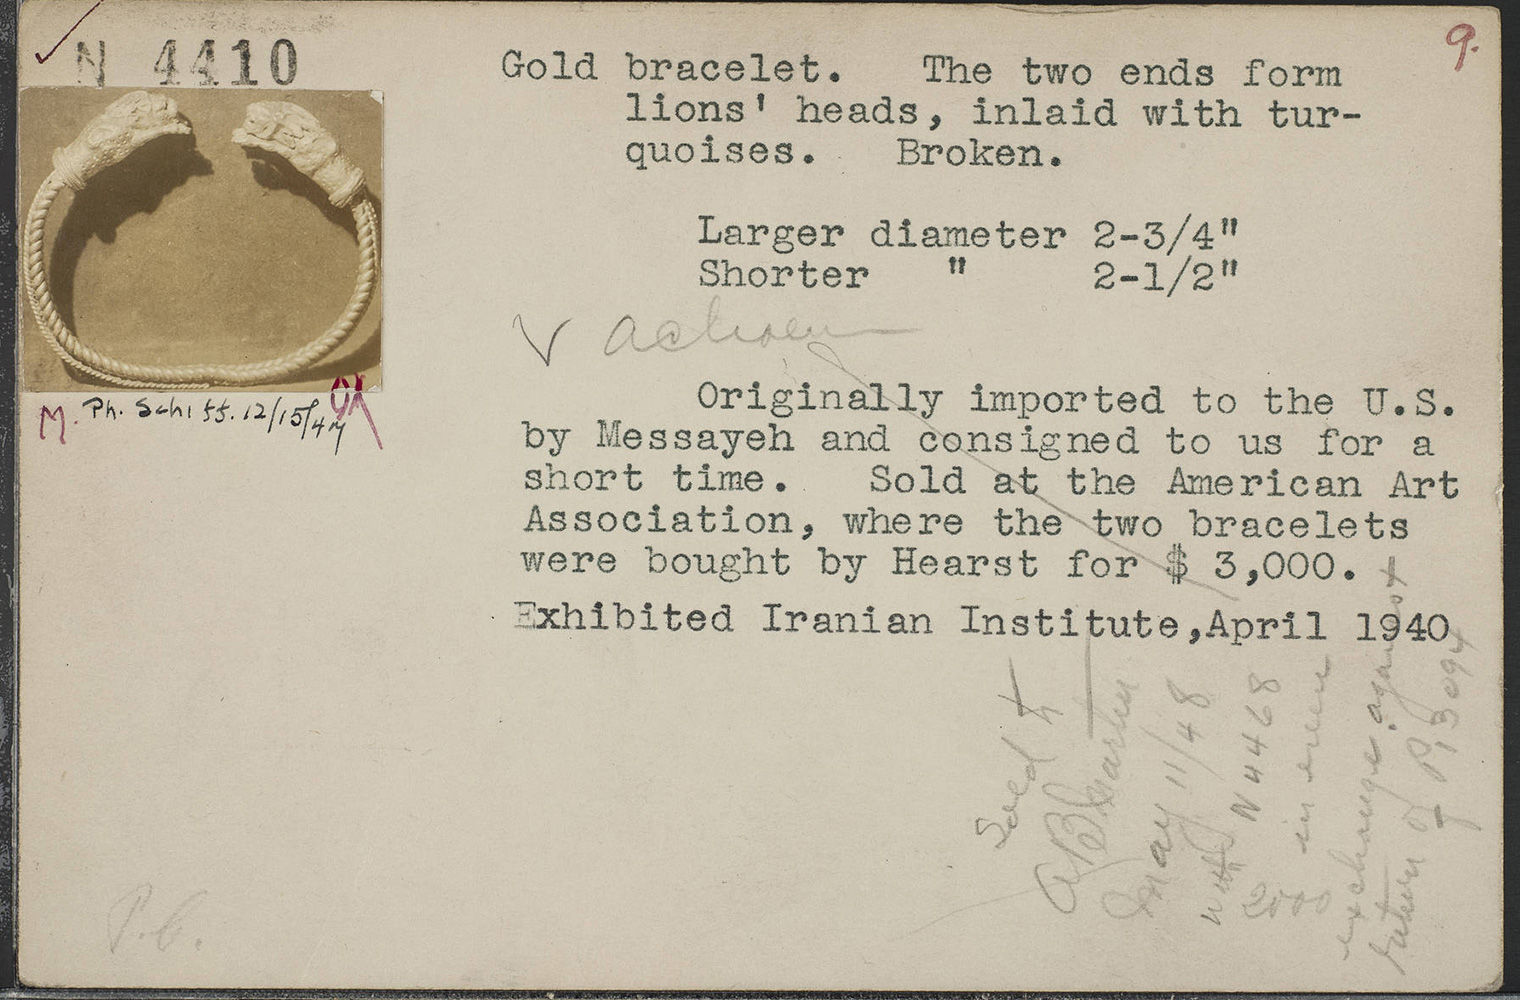 A small card with the picture of a bracelet on the top left hand corner and text that describes its provenance and dimensions.